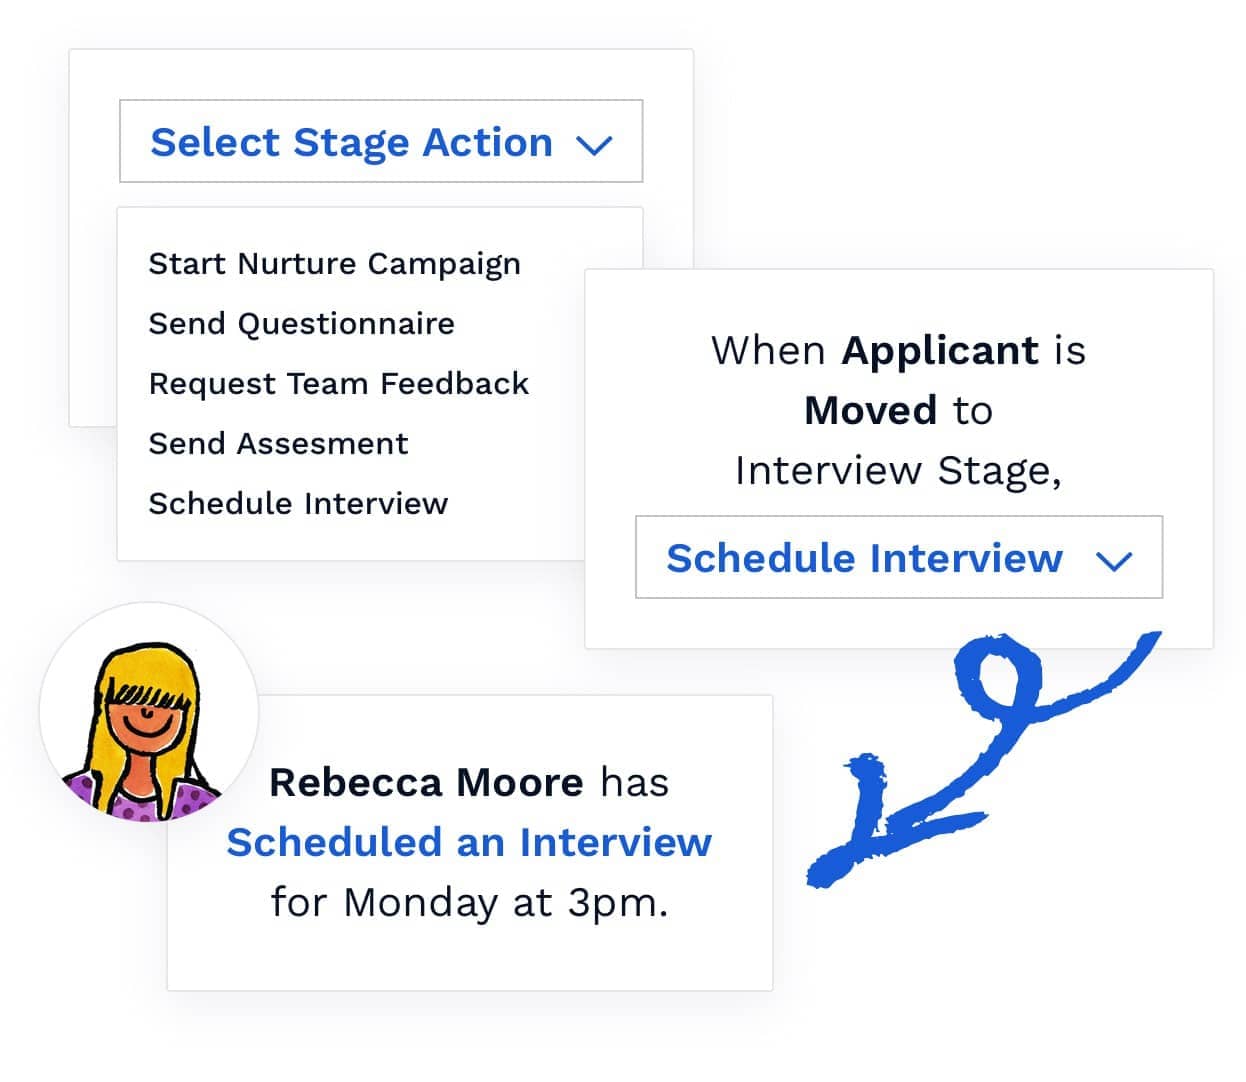 Breezy HR lets users set “stage actions” so that automated actions, like assessments, can be sent to candidates without the need of manual follow-up by the HR team.